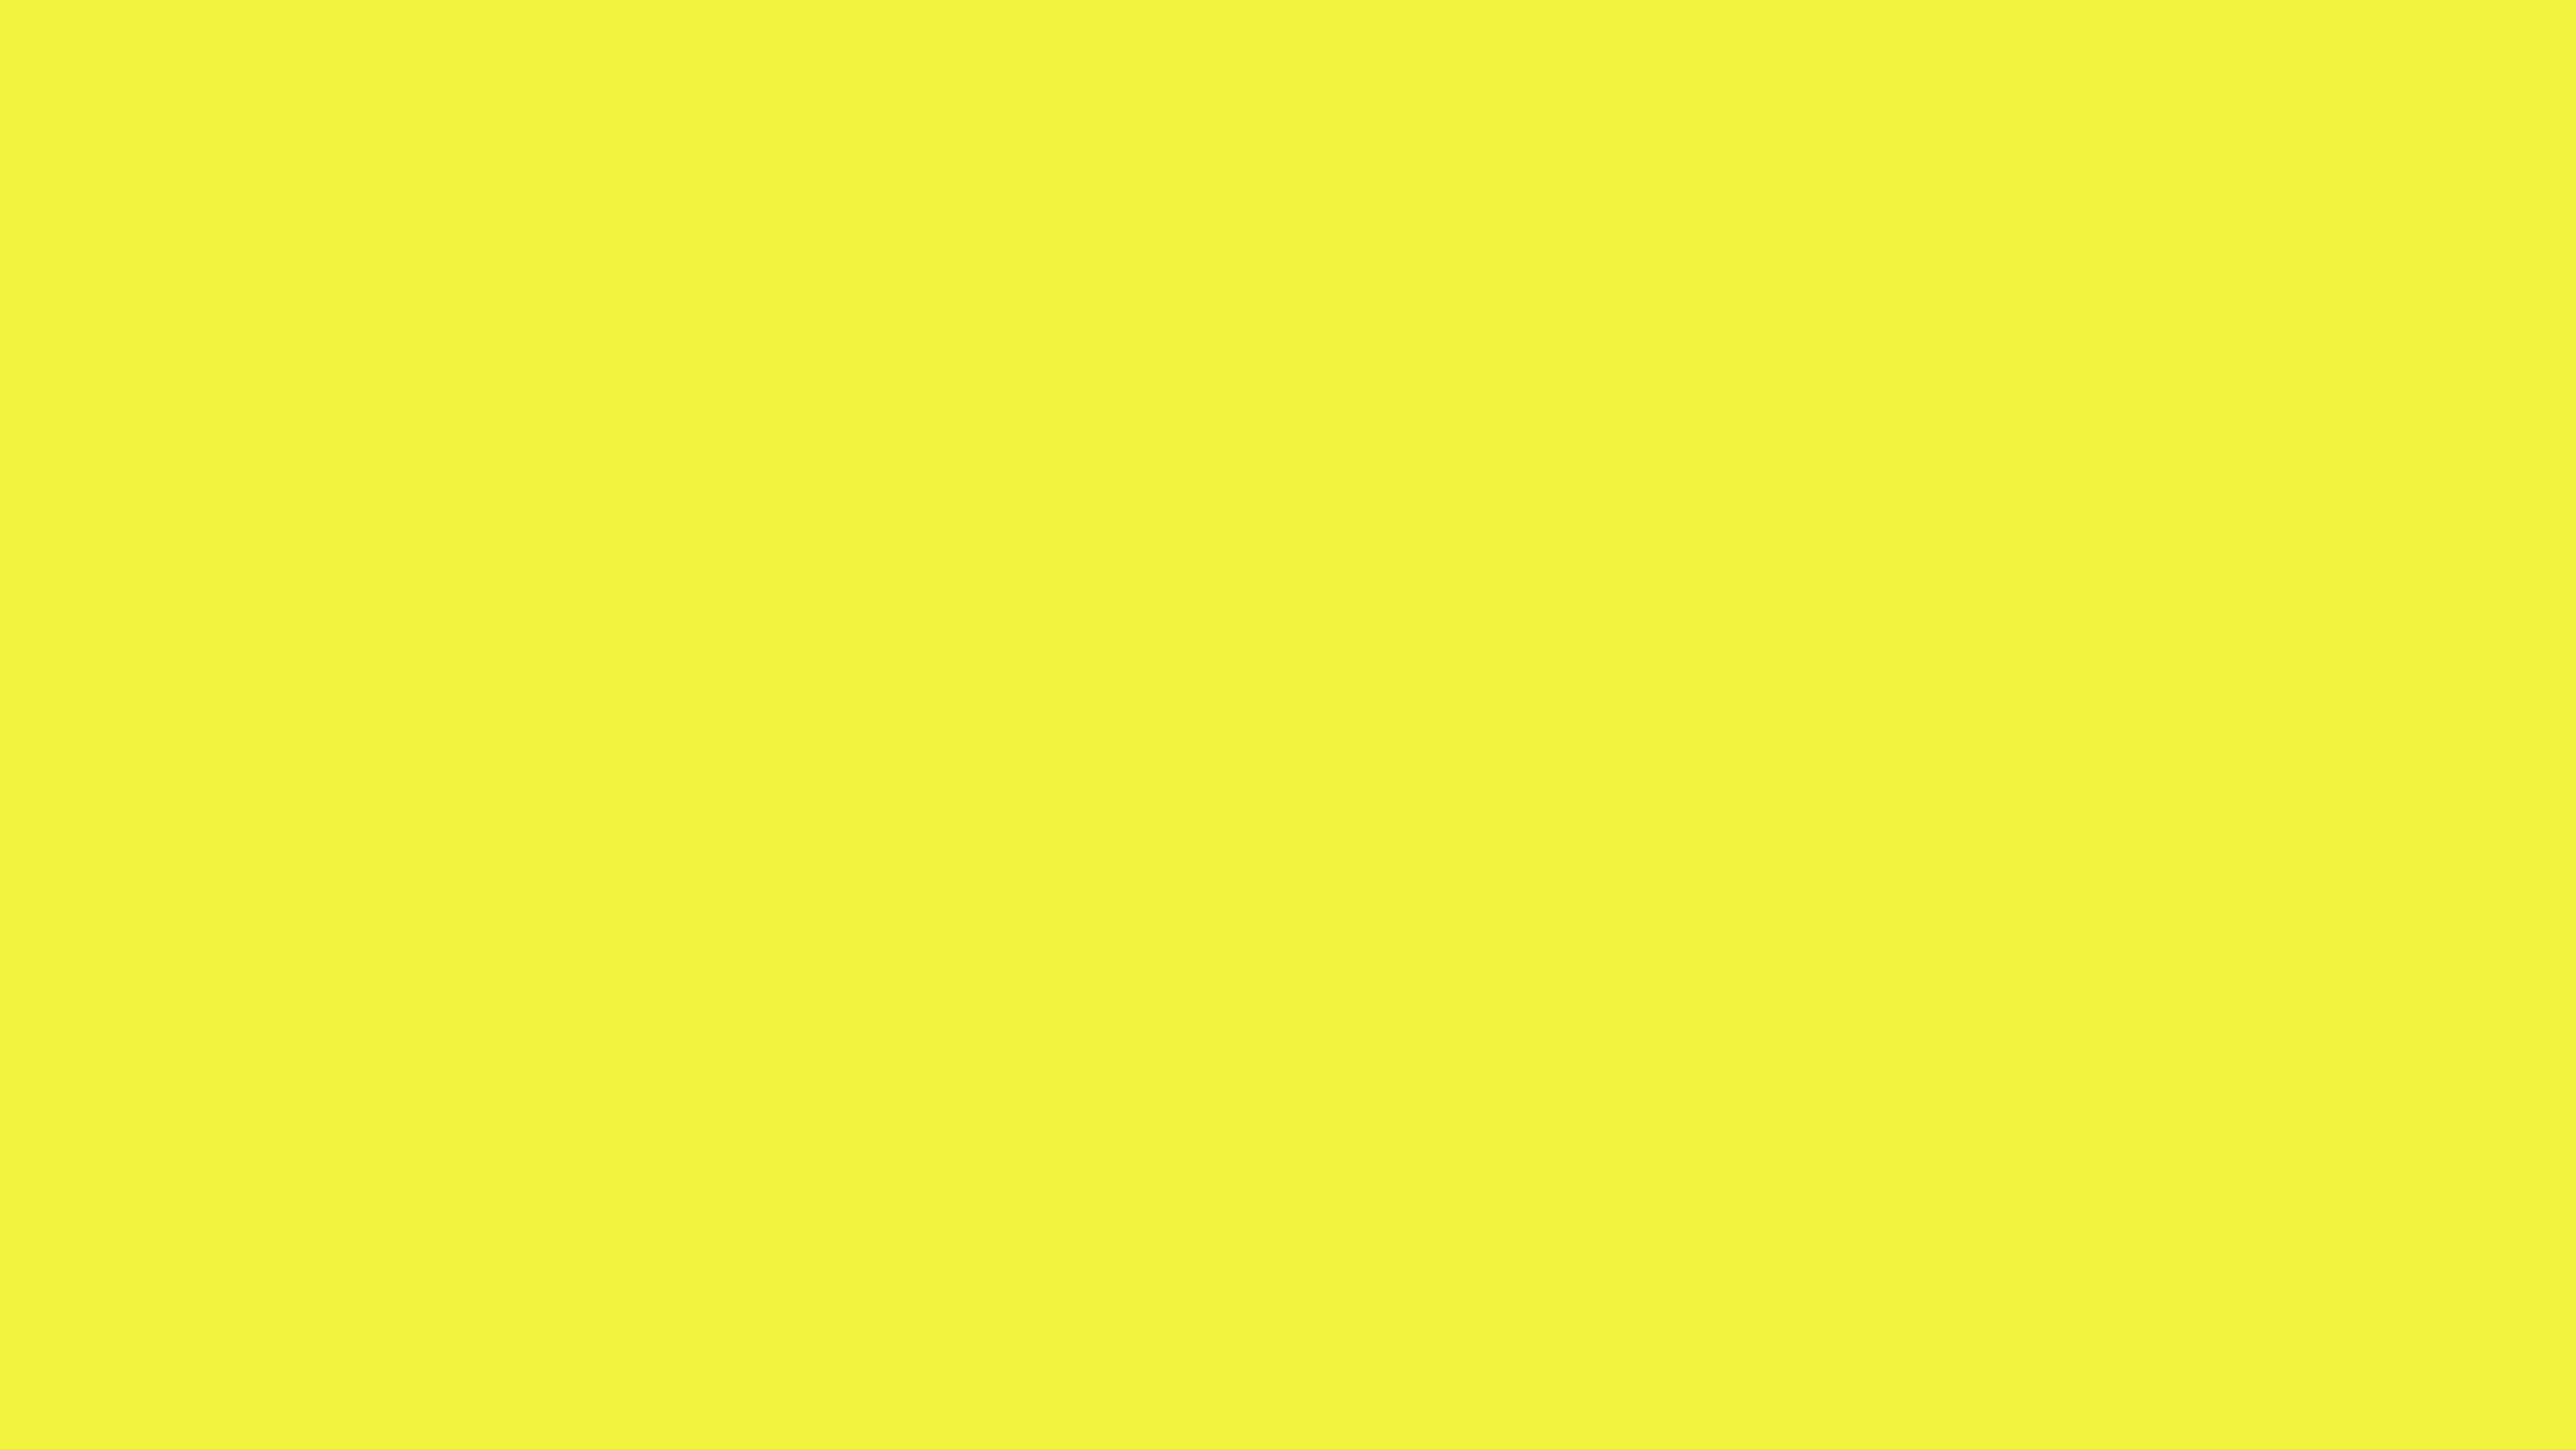 Off Yellow Solid Color Background Image | Free Image Generator